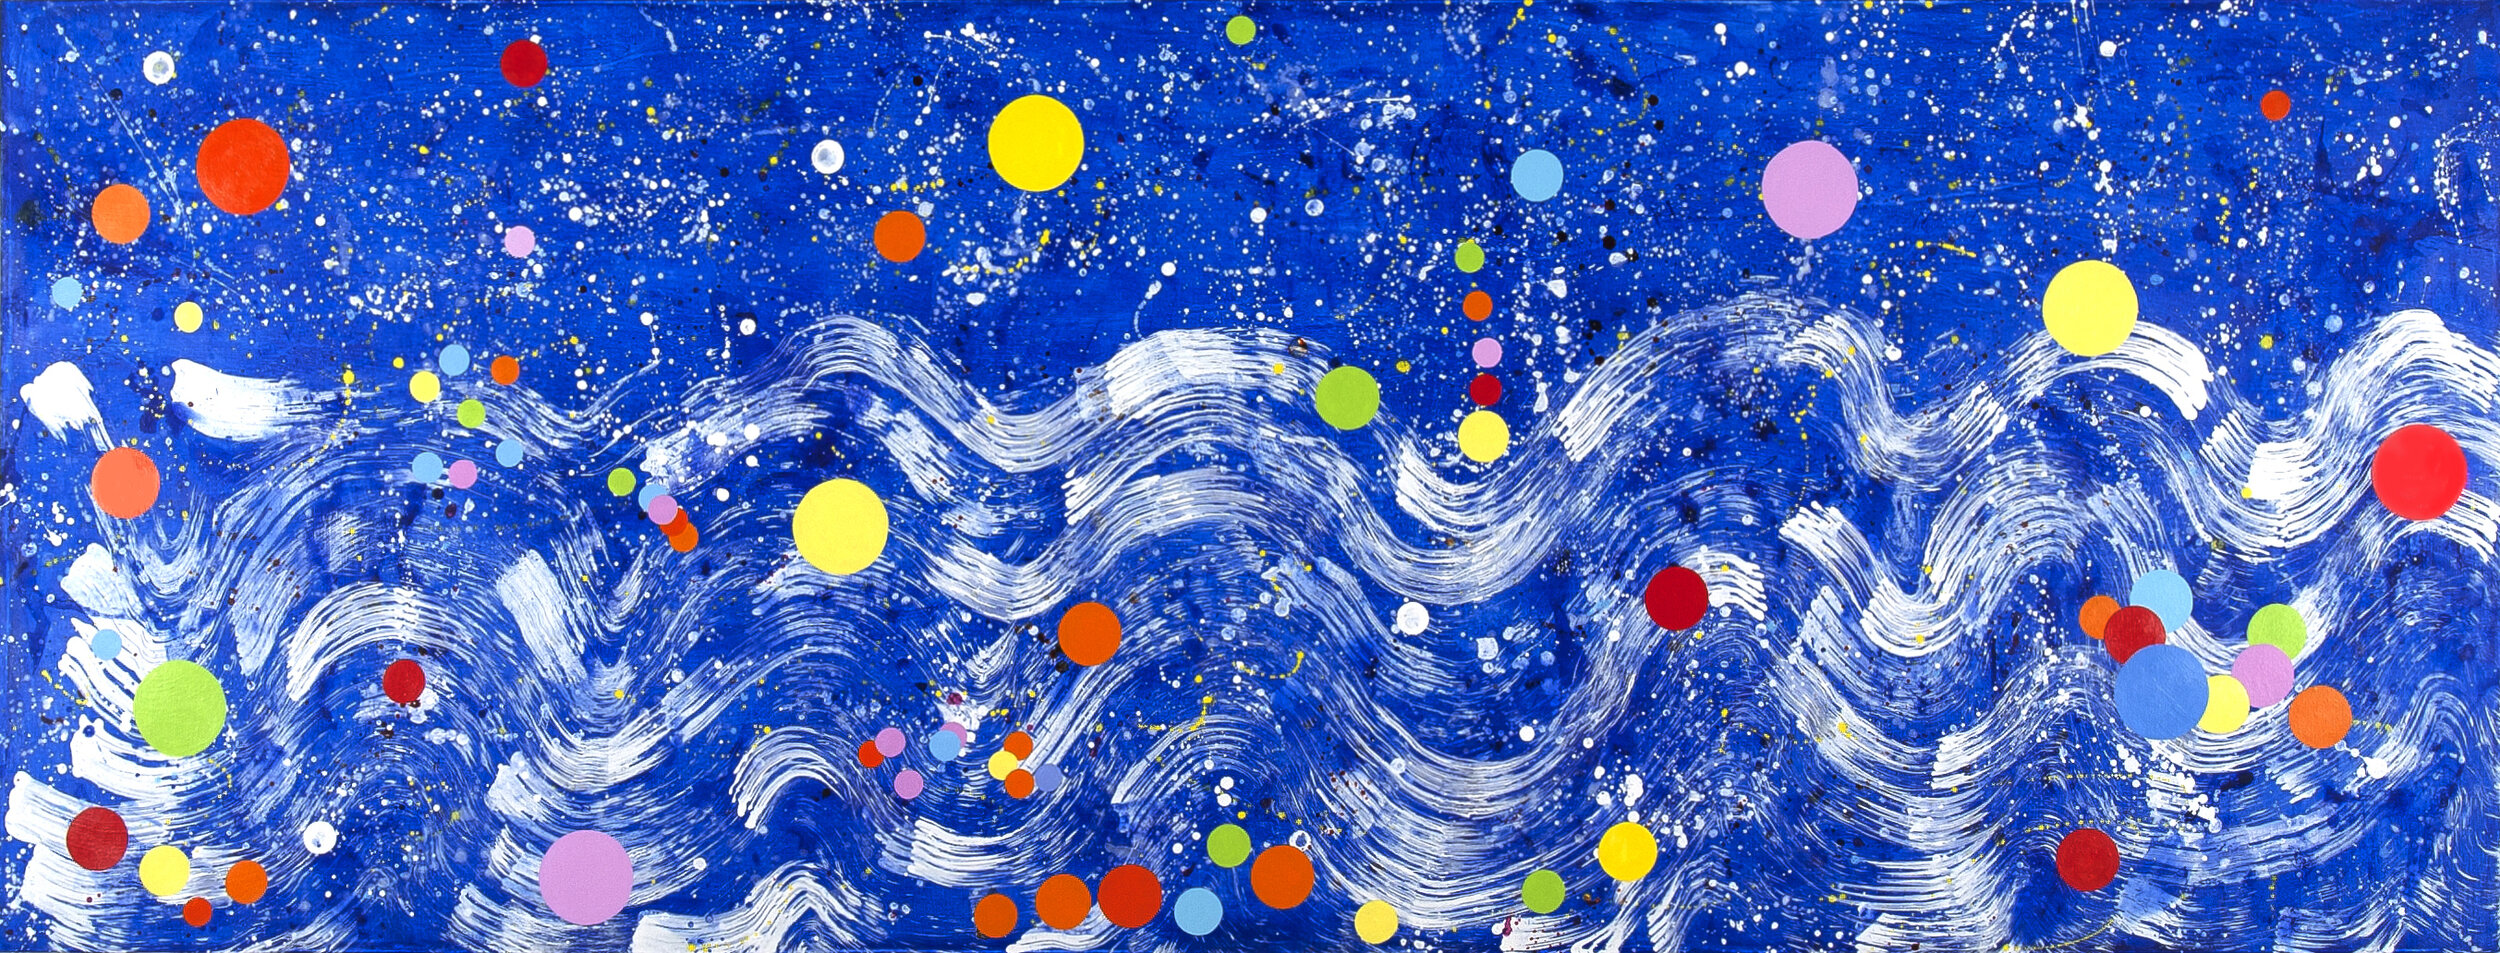   Night Waves , 2013, acrylic on canvas, 30 x 80 inches 